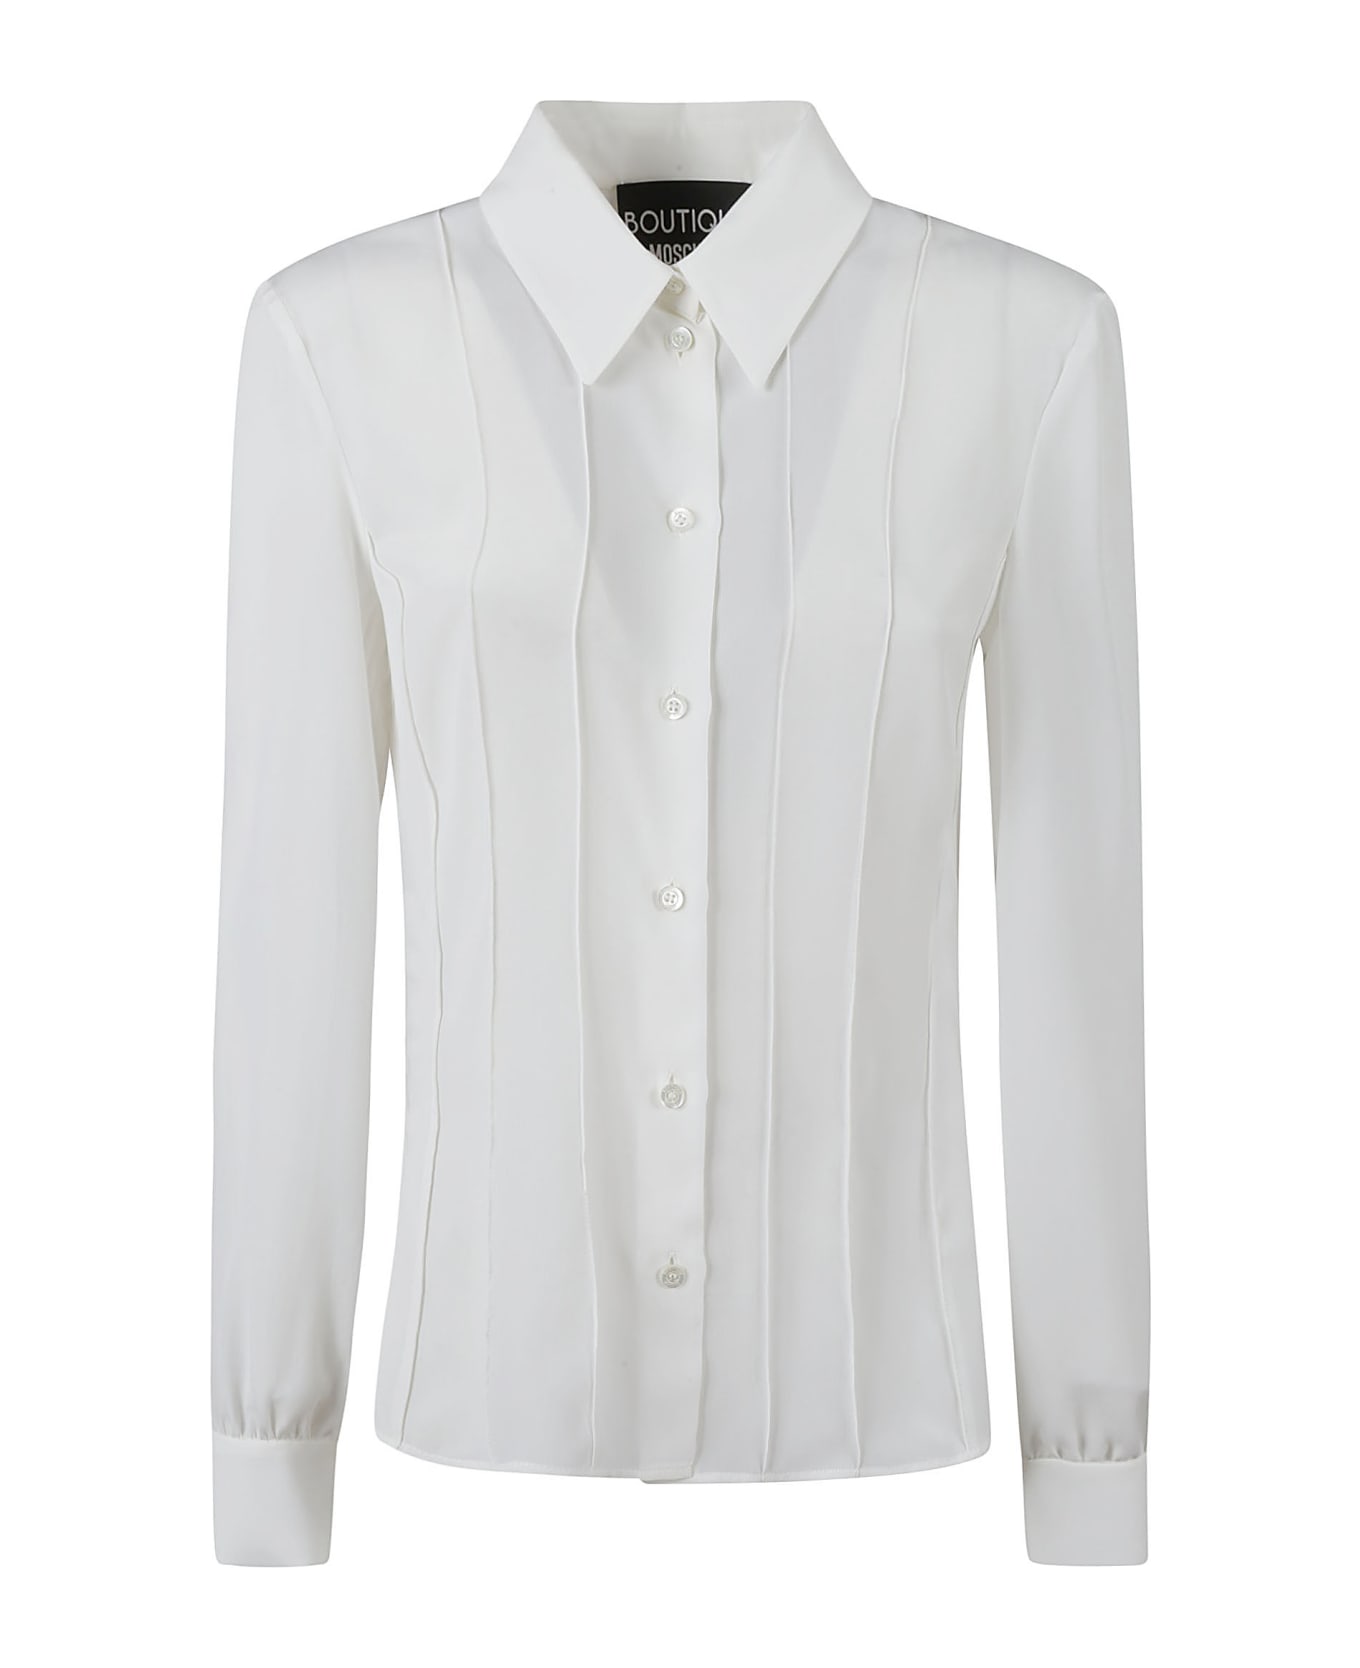 Boutique Moschino Pleated Shirt - White シャツ